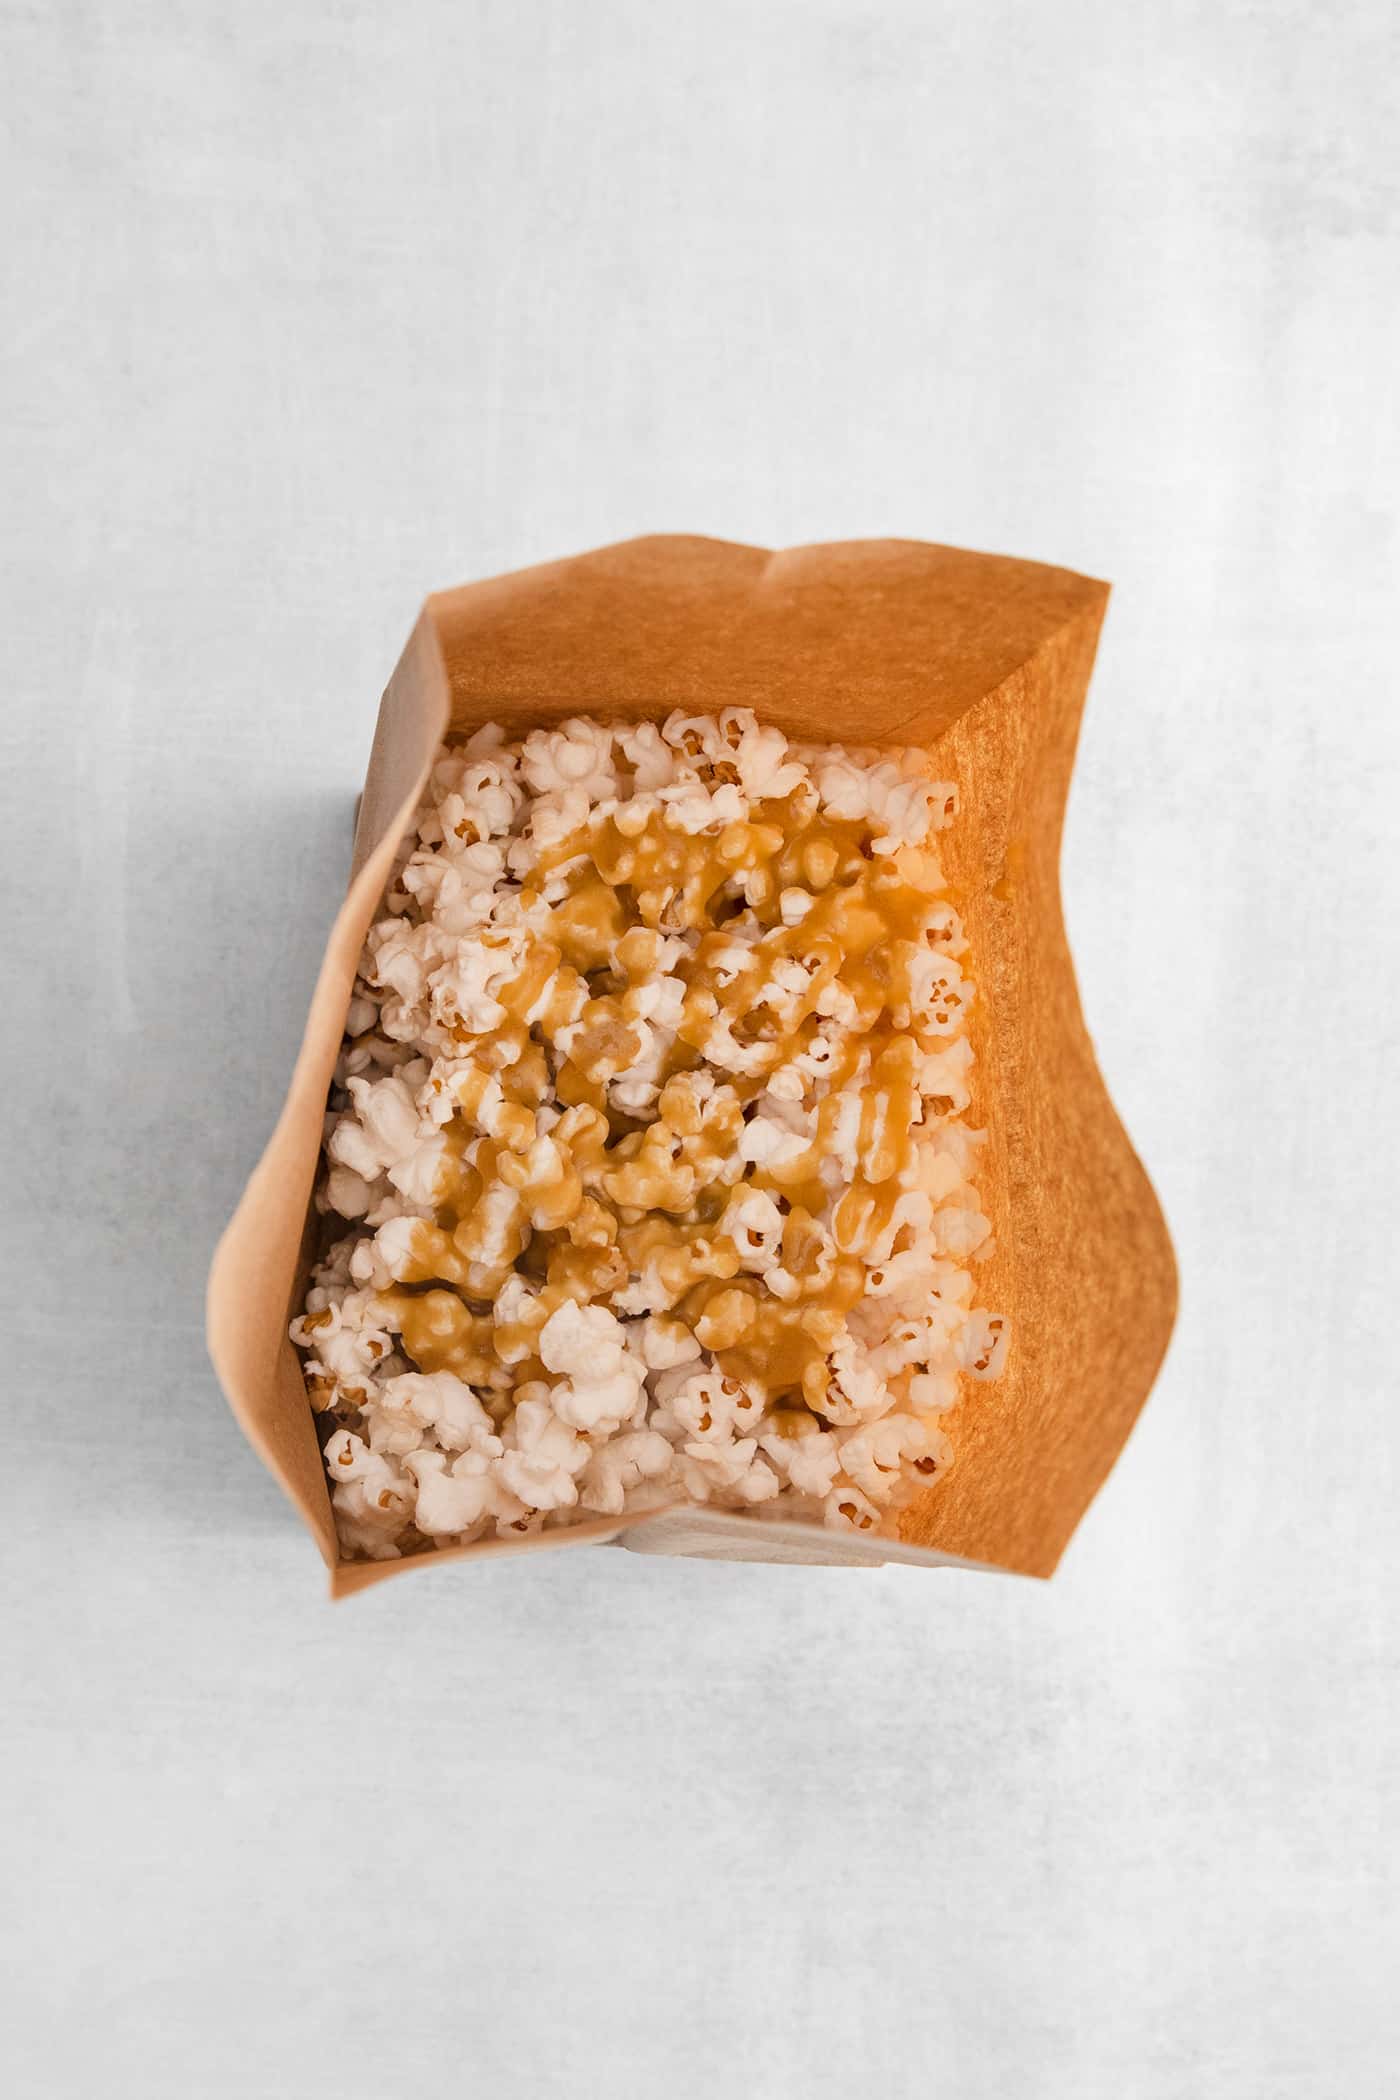 Caramel drizzled over popcorn in a paper bag